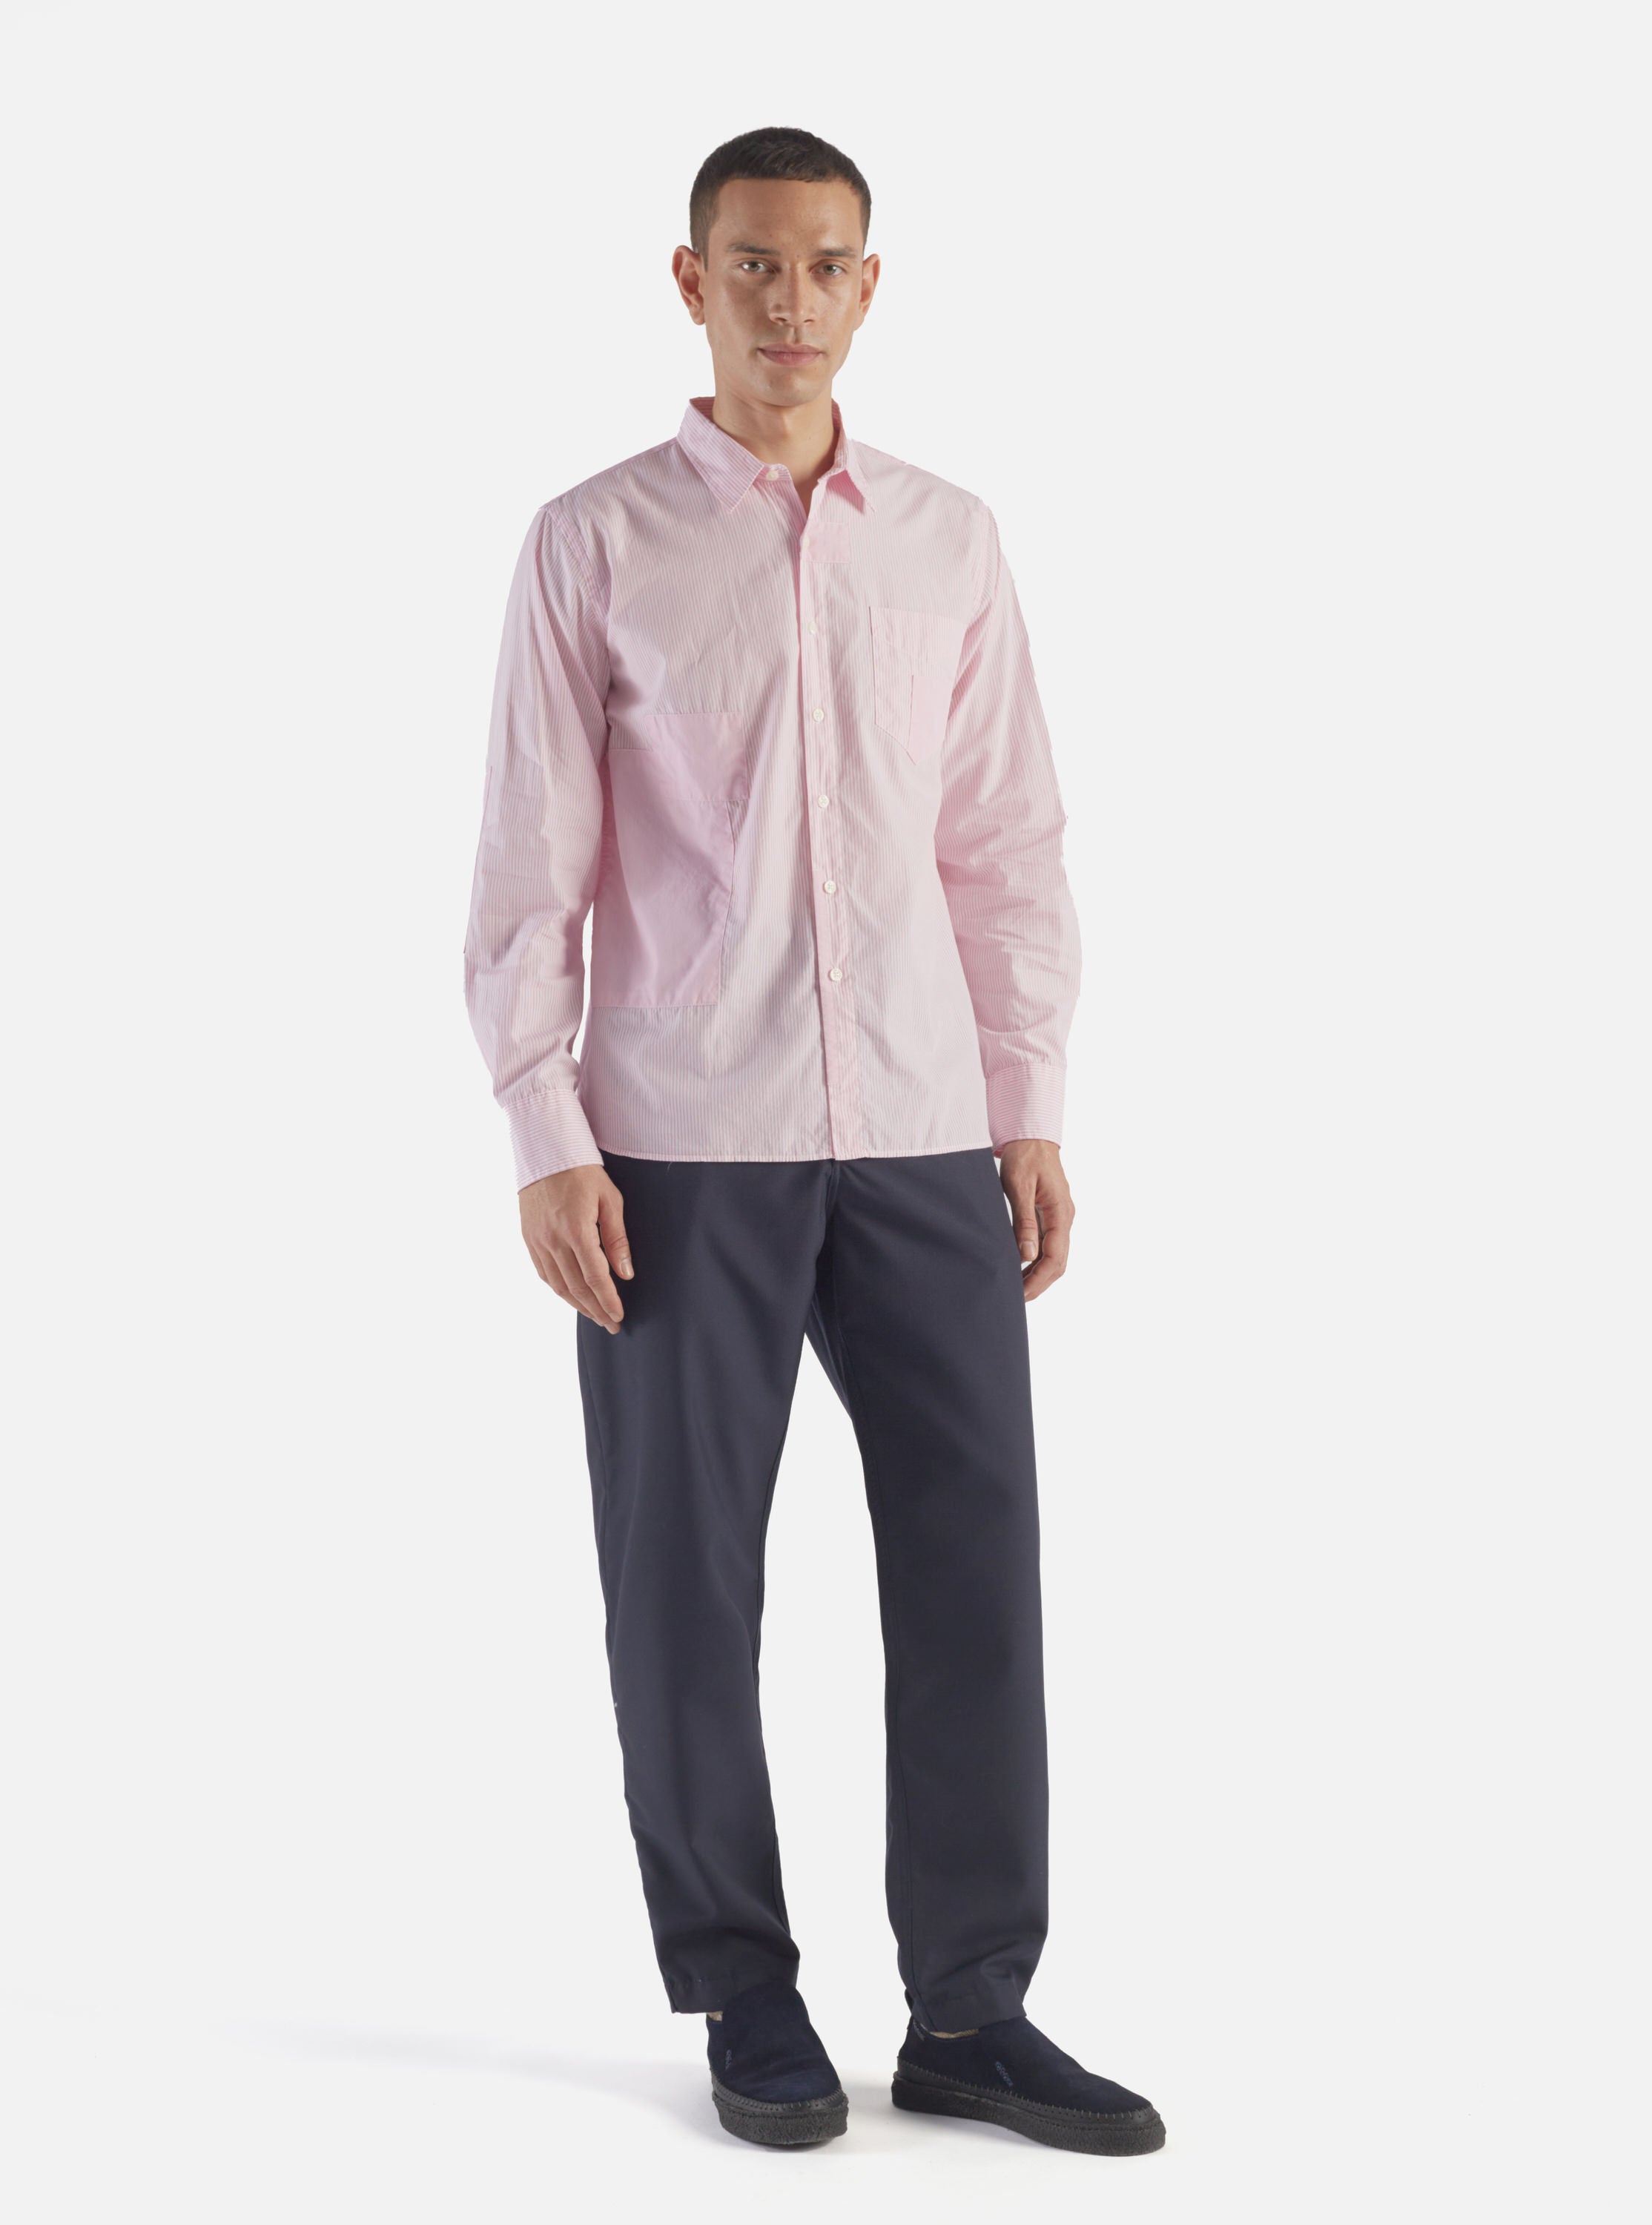 Universal Works Patched Shirt in Pink Stripe Mixed Classics